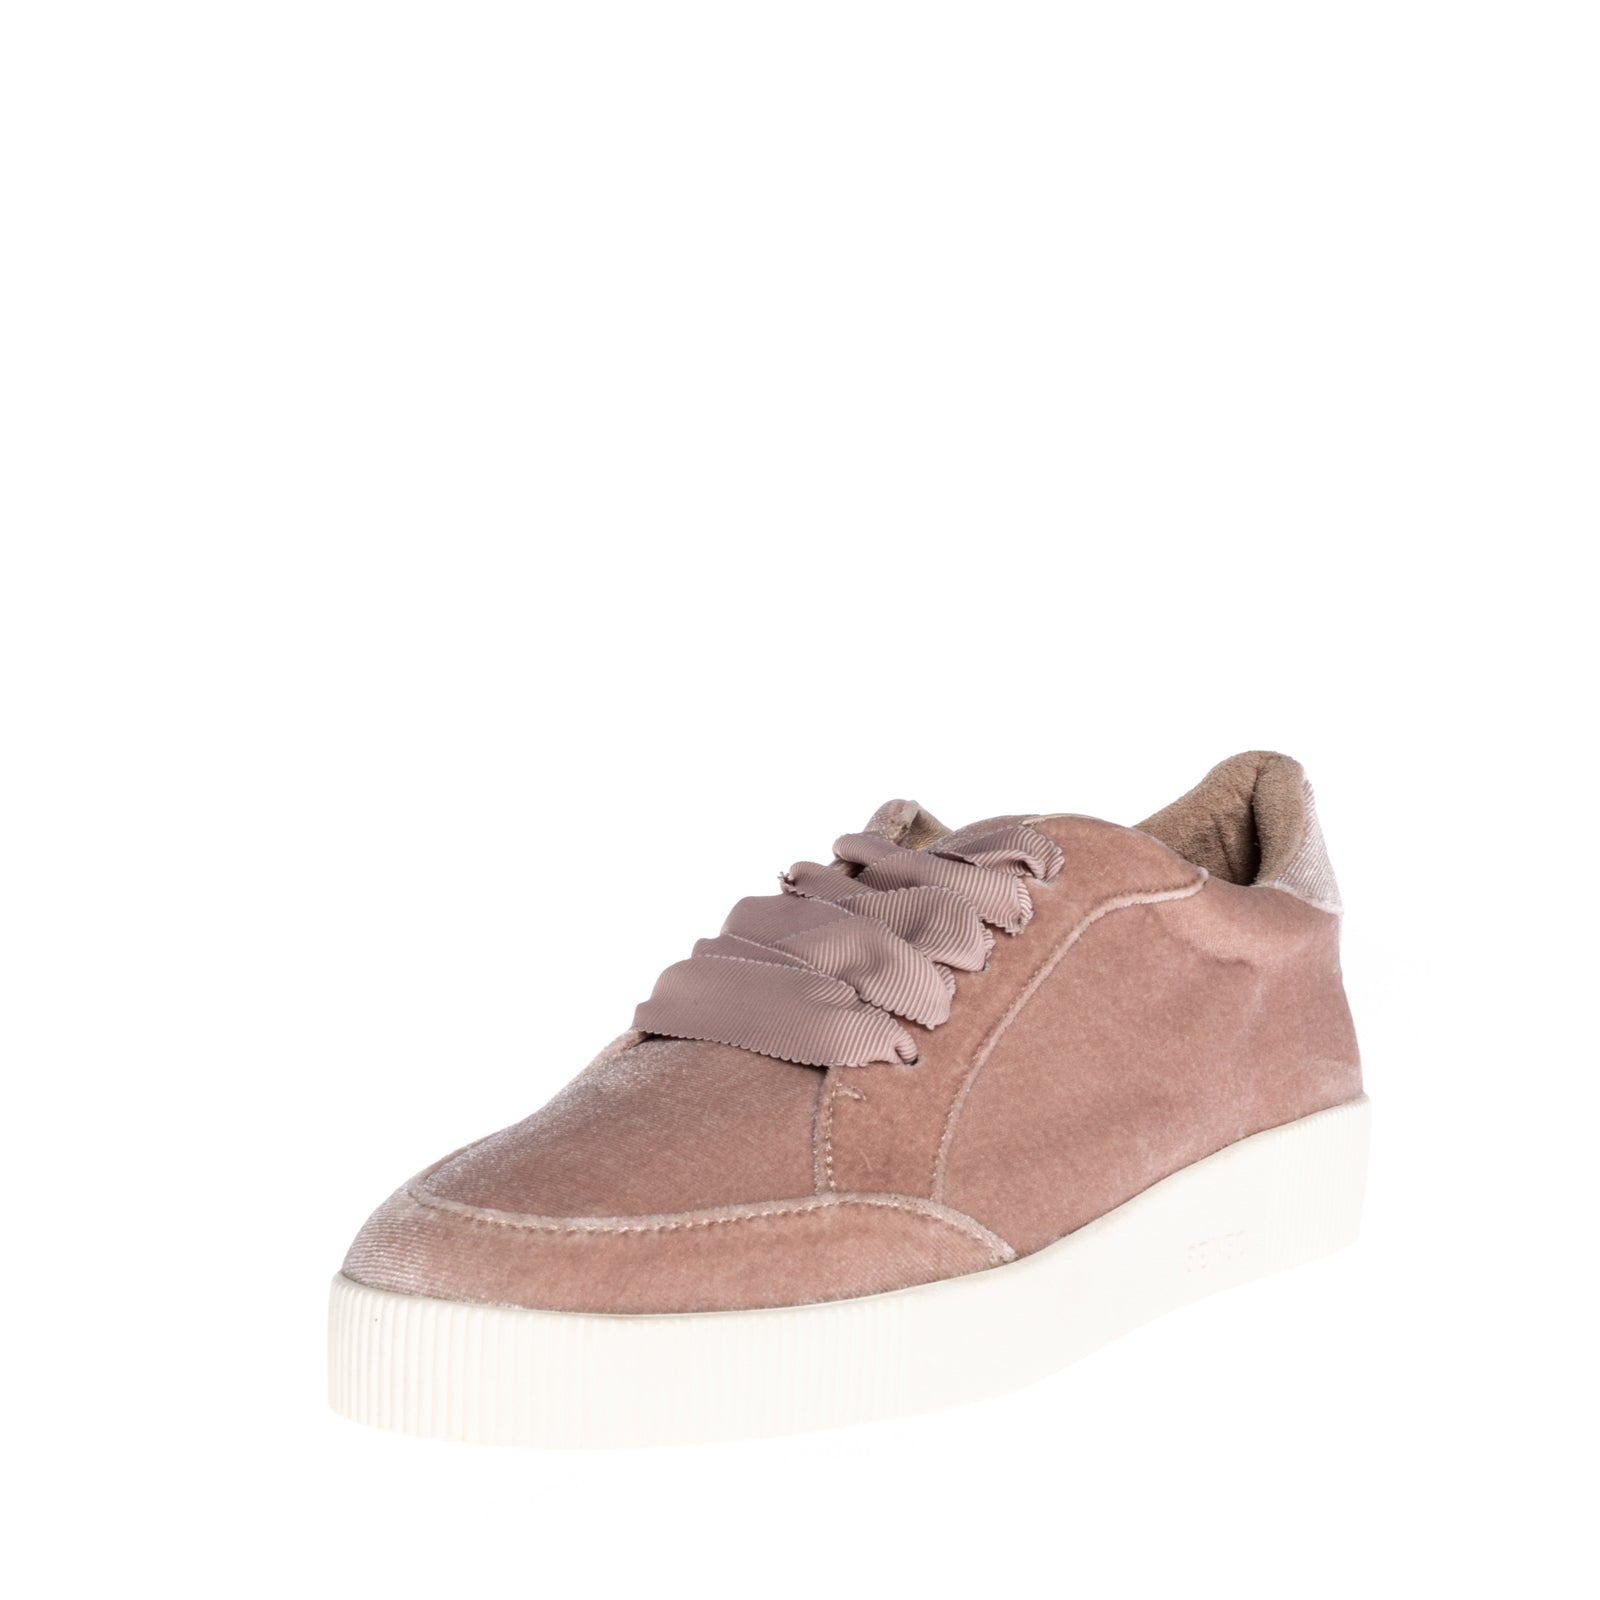 SENSO Velour Sneakers Size 39 UK 6 US 9 Grosgrain Laces Embossed Logo Round Toe gallery main photo